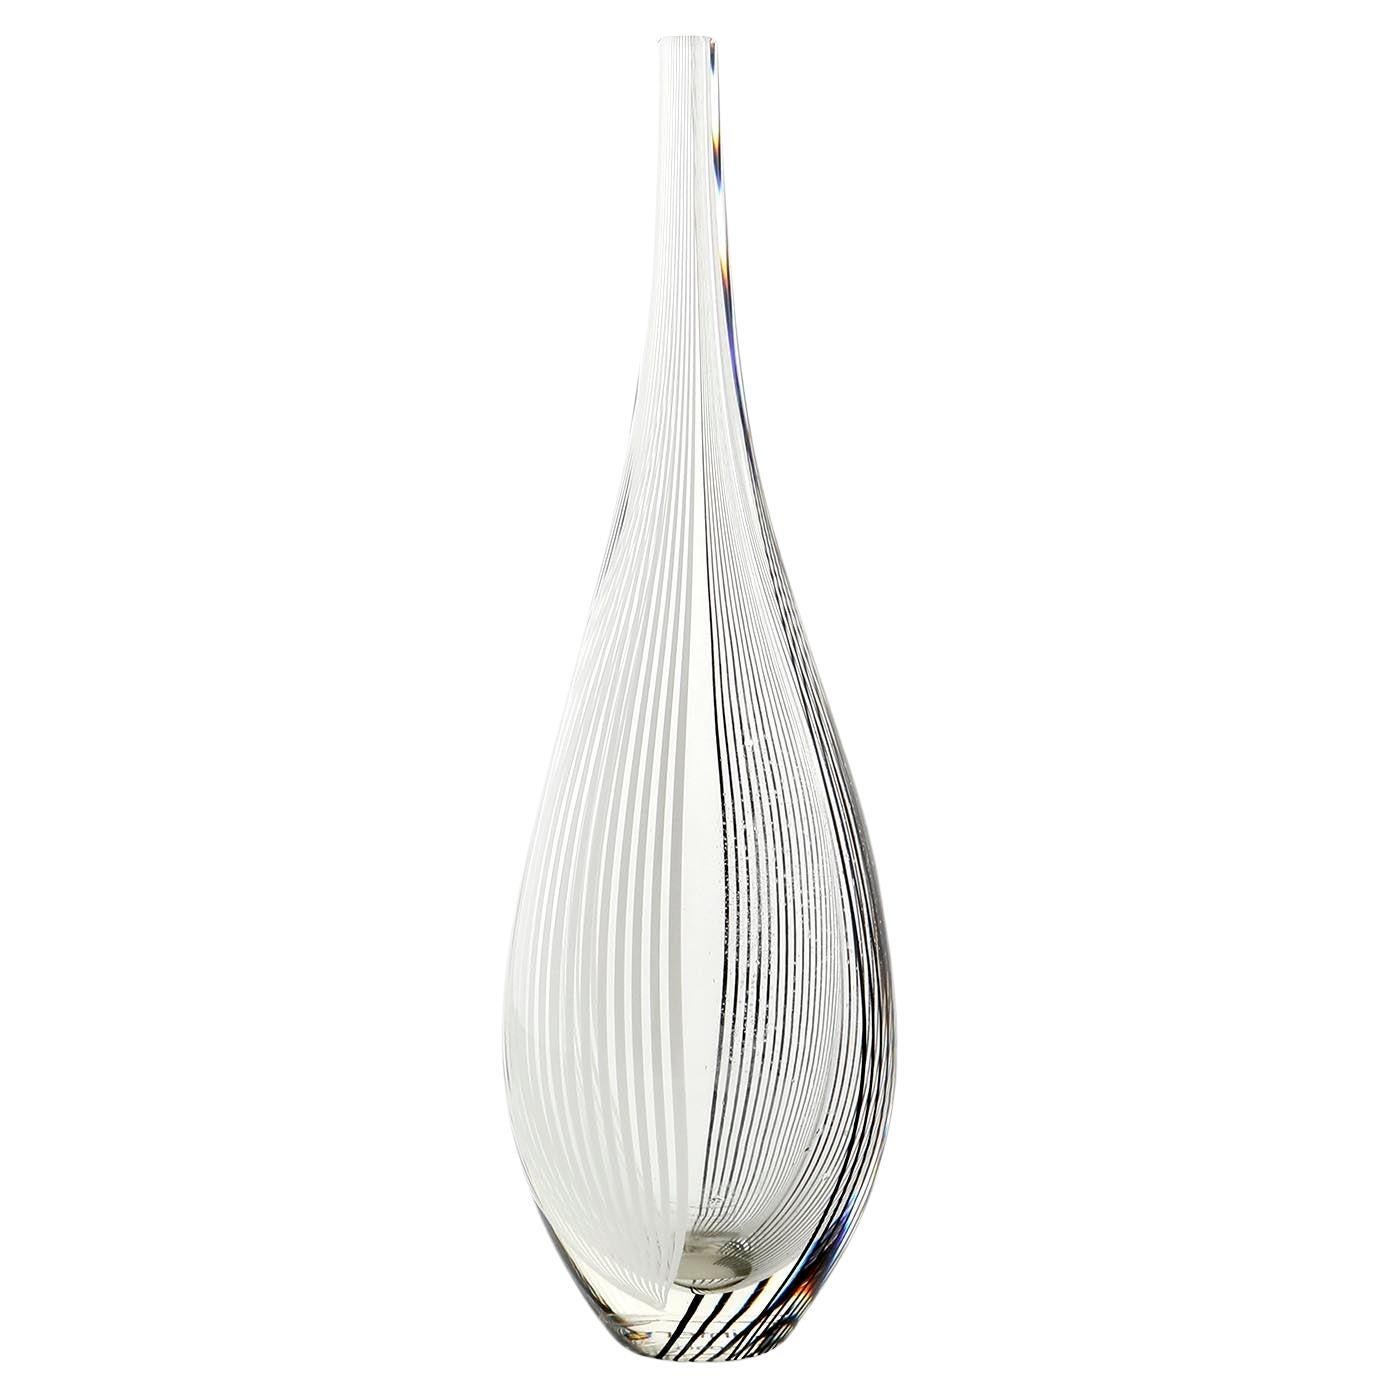 Late 20th Century Vase Lino Tagliapietra for Effetre Italy, Black White Stripped Clear Glass, 1987 For Sale